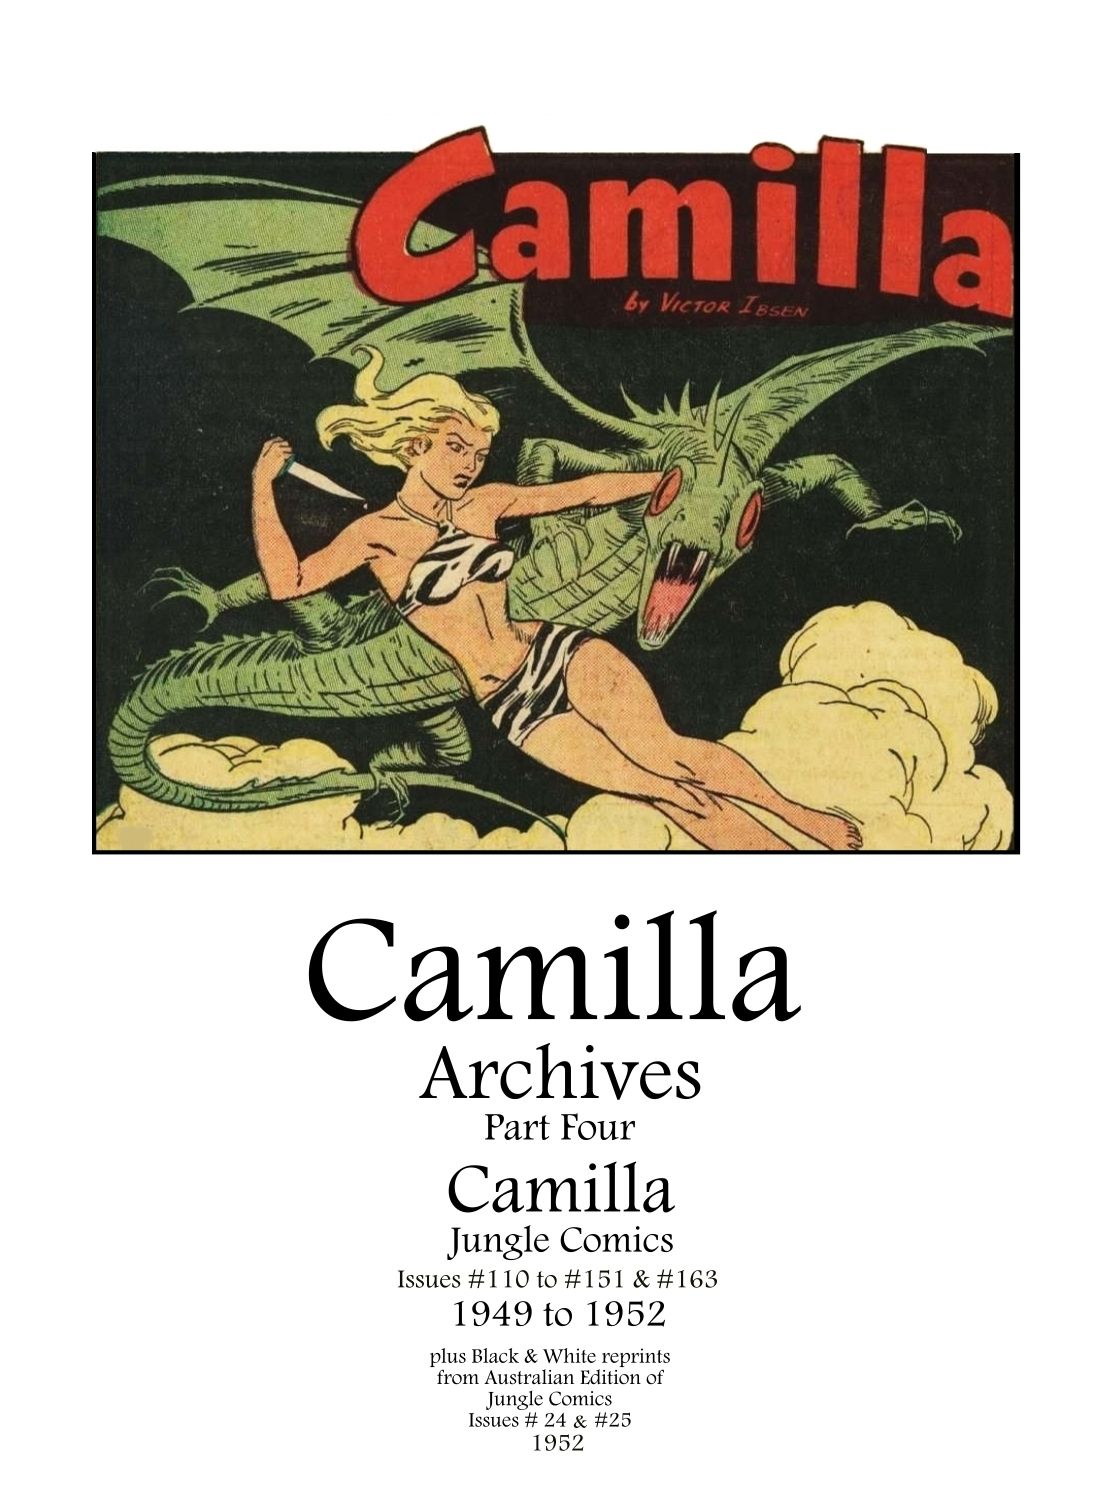 Book Cover For Camilla Archives Part 4 (1949-1952)